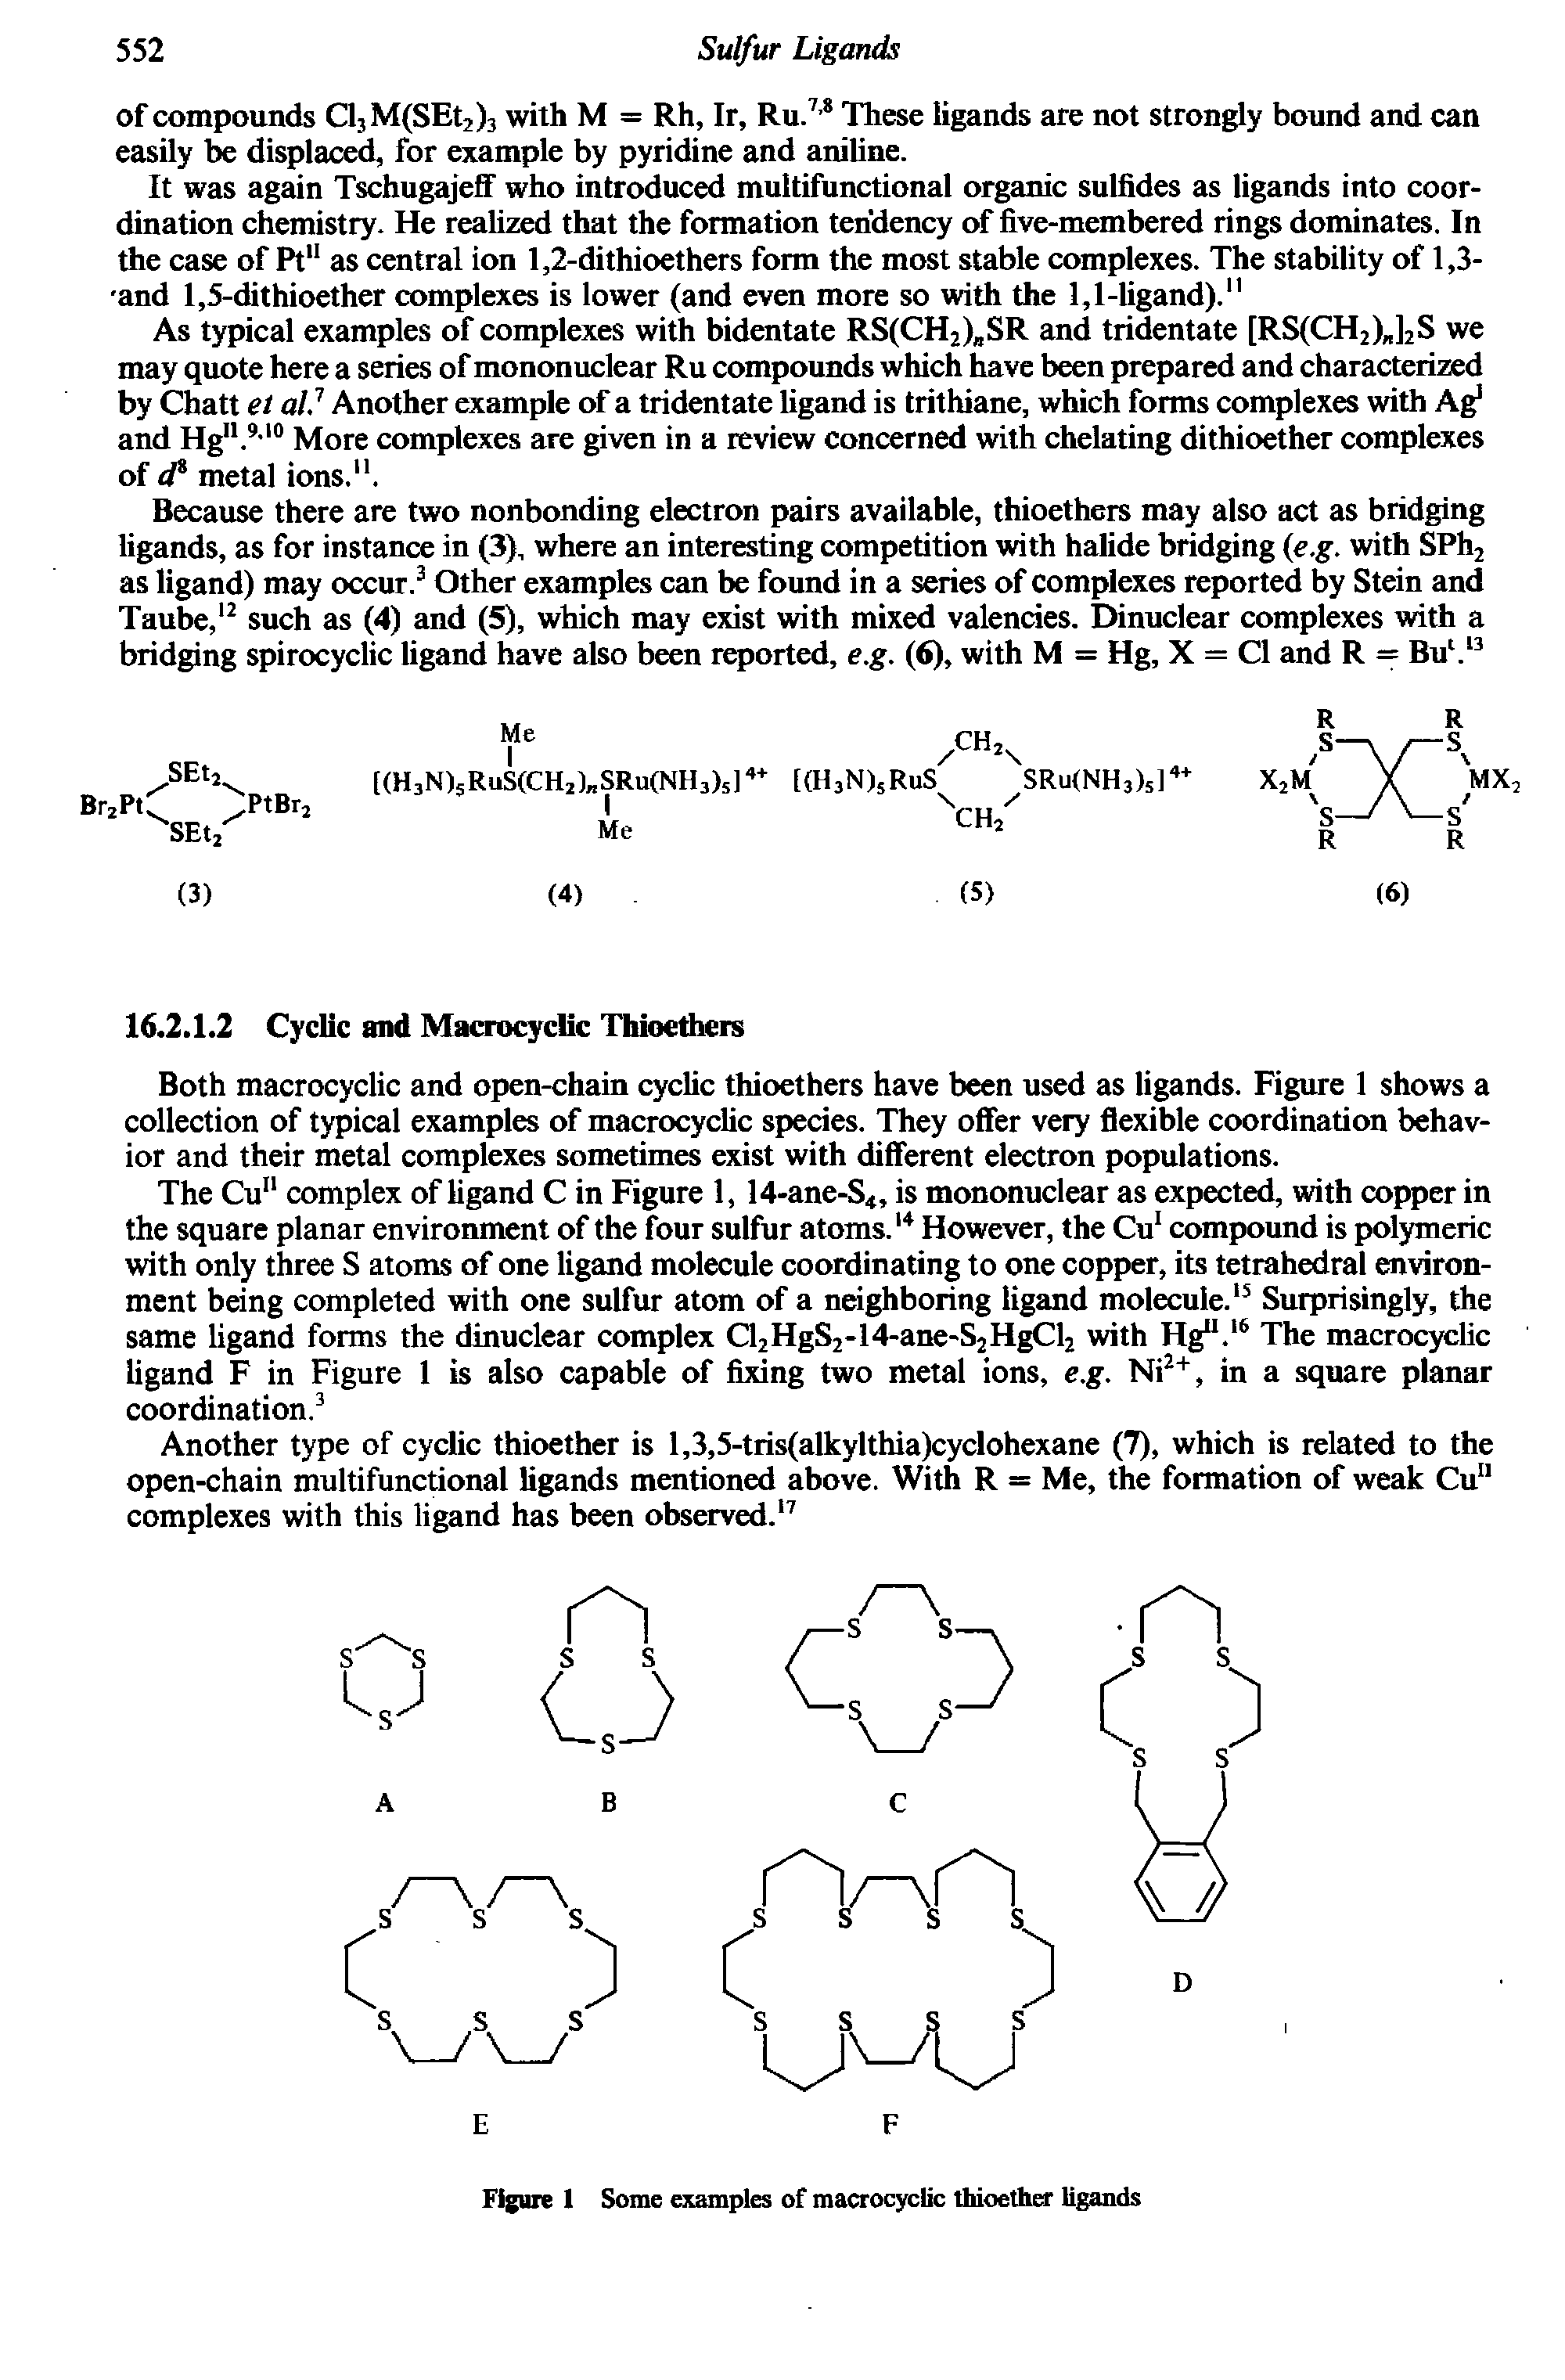 Figure 1 Some examples of macrocyclic thioether ligands...